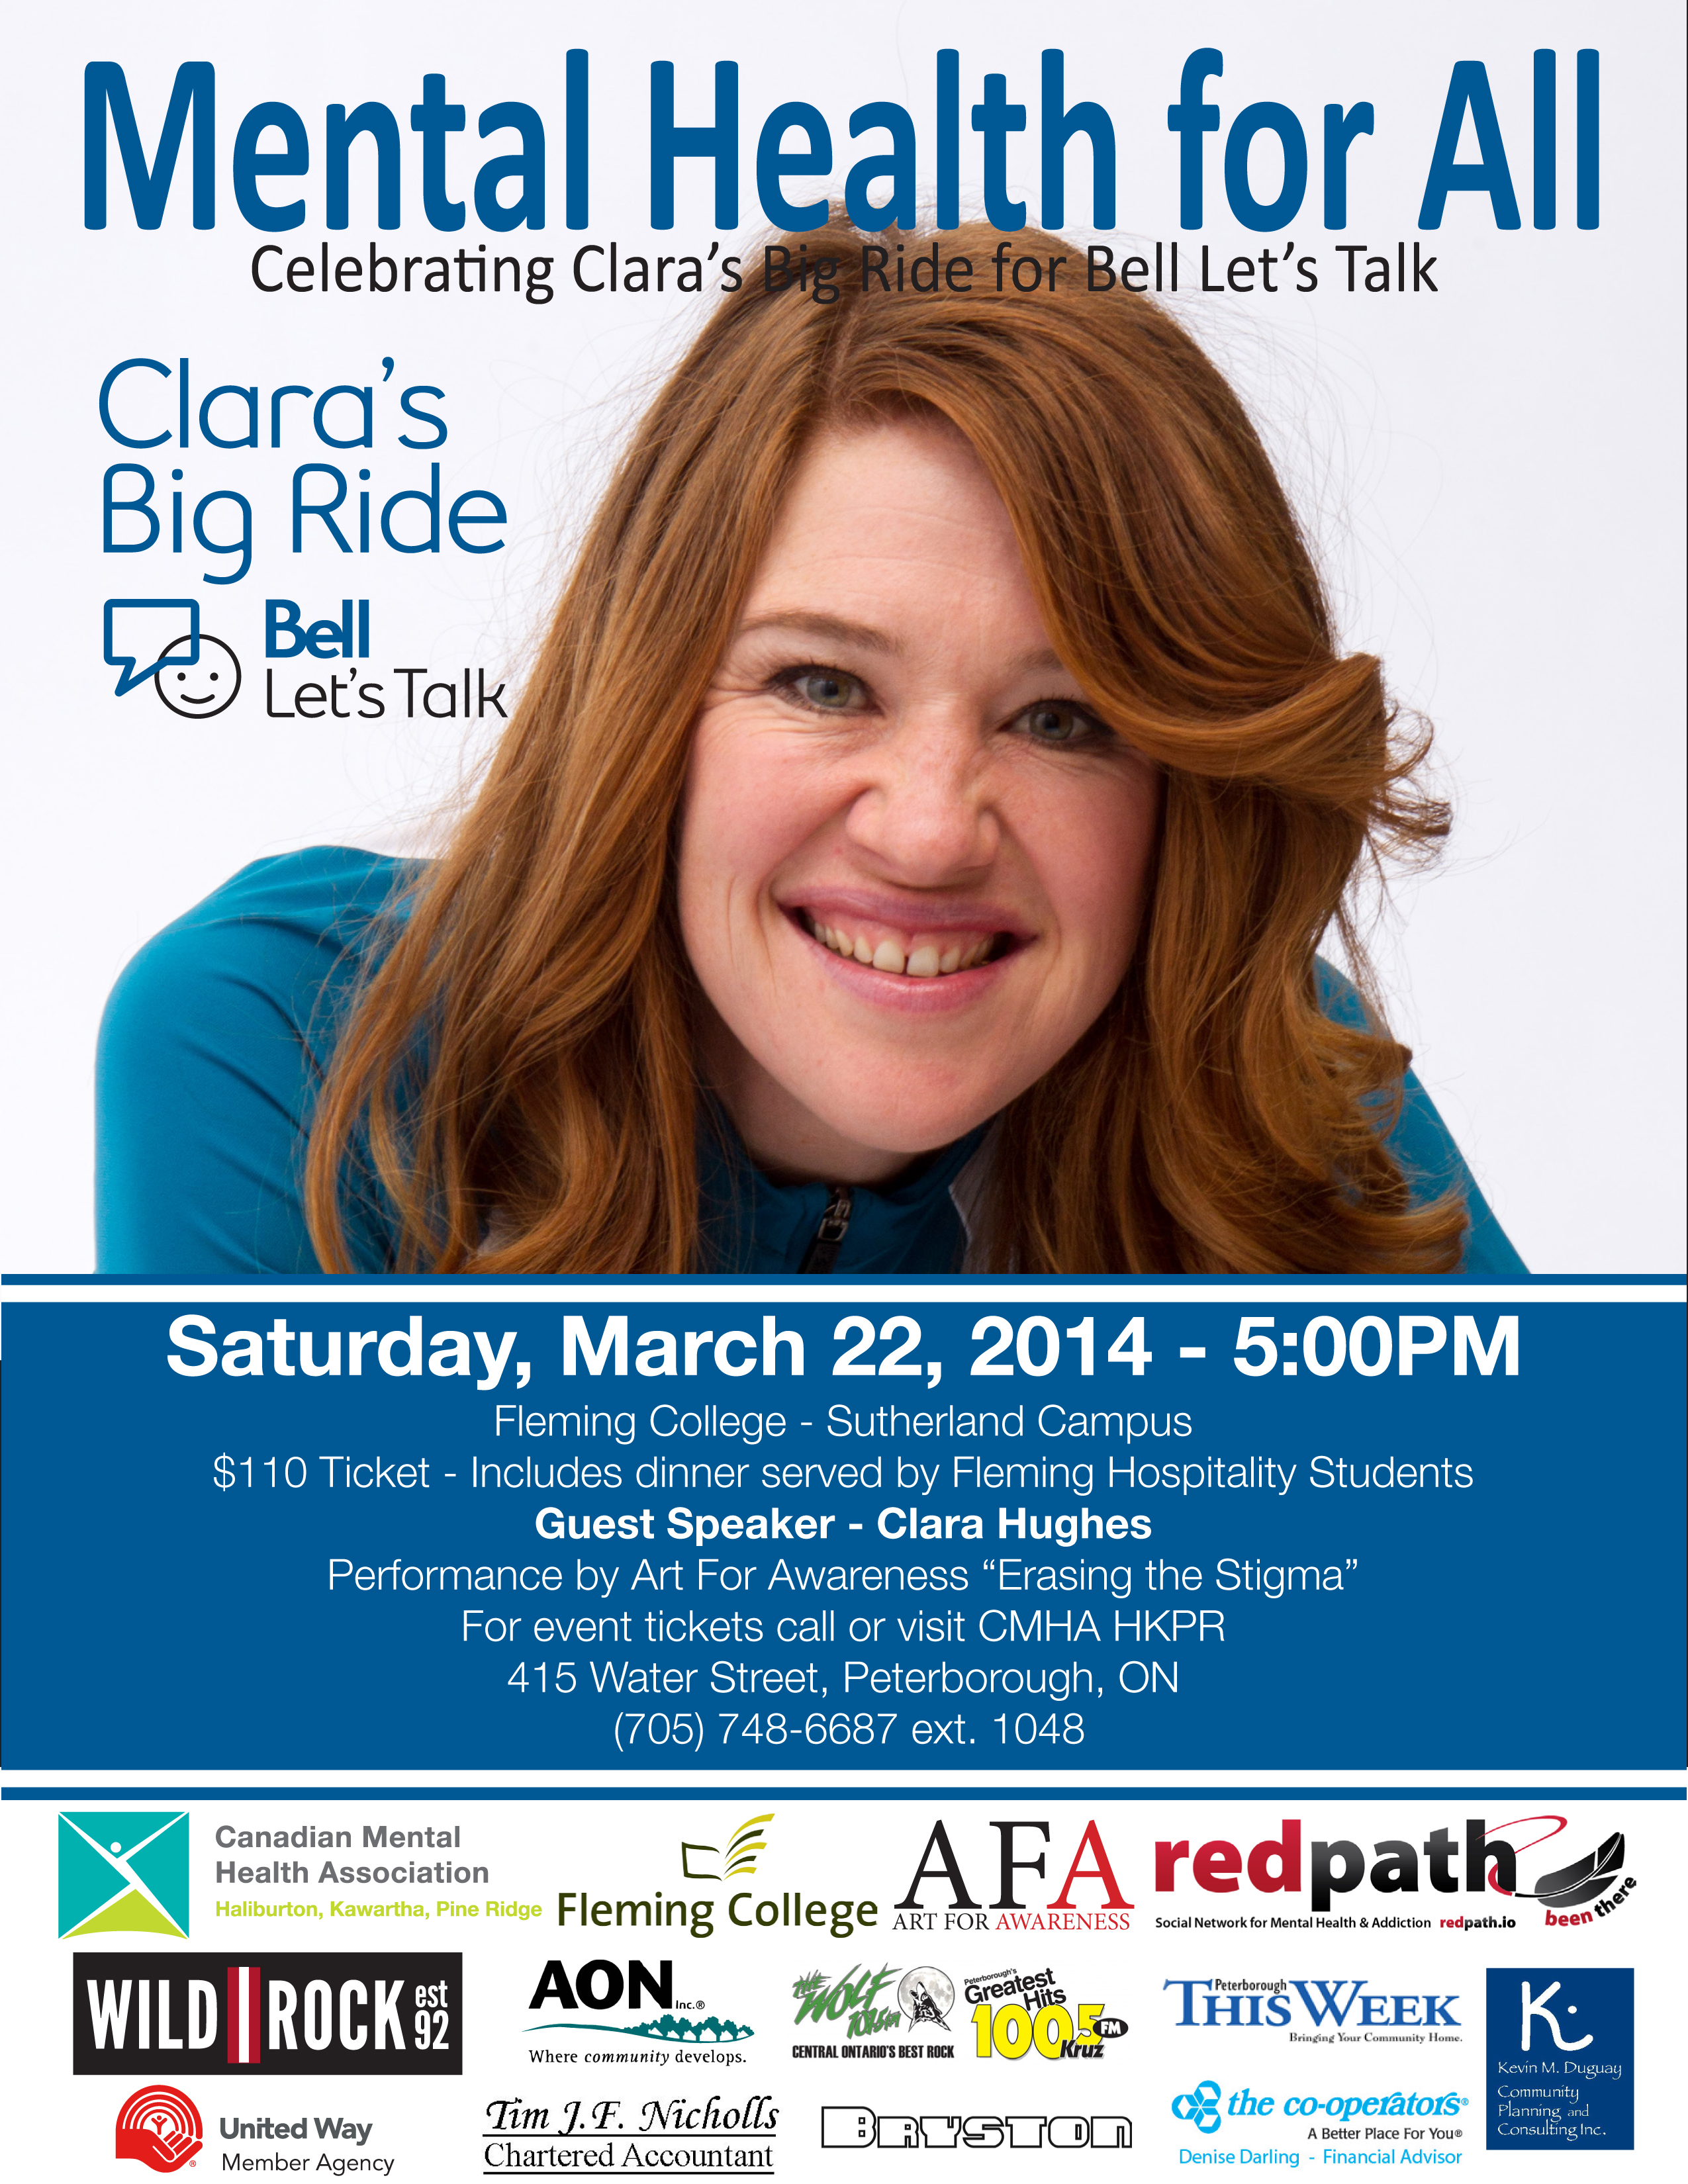 Clara will be at Fleming College the evening